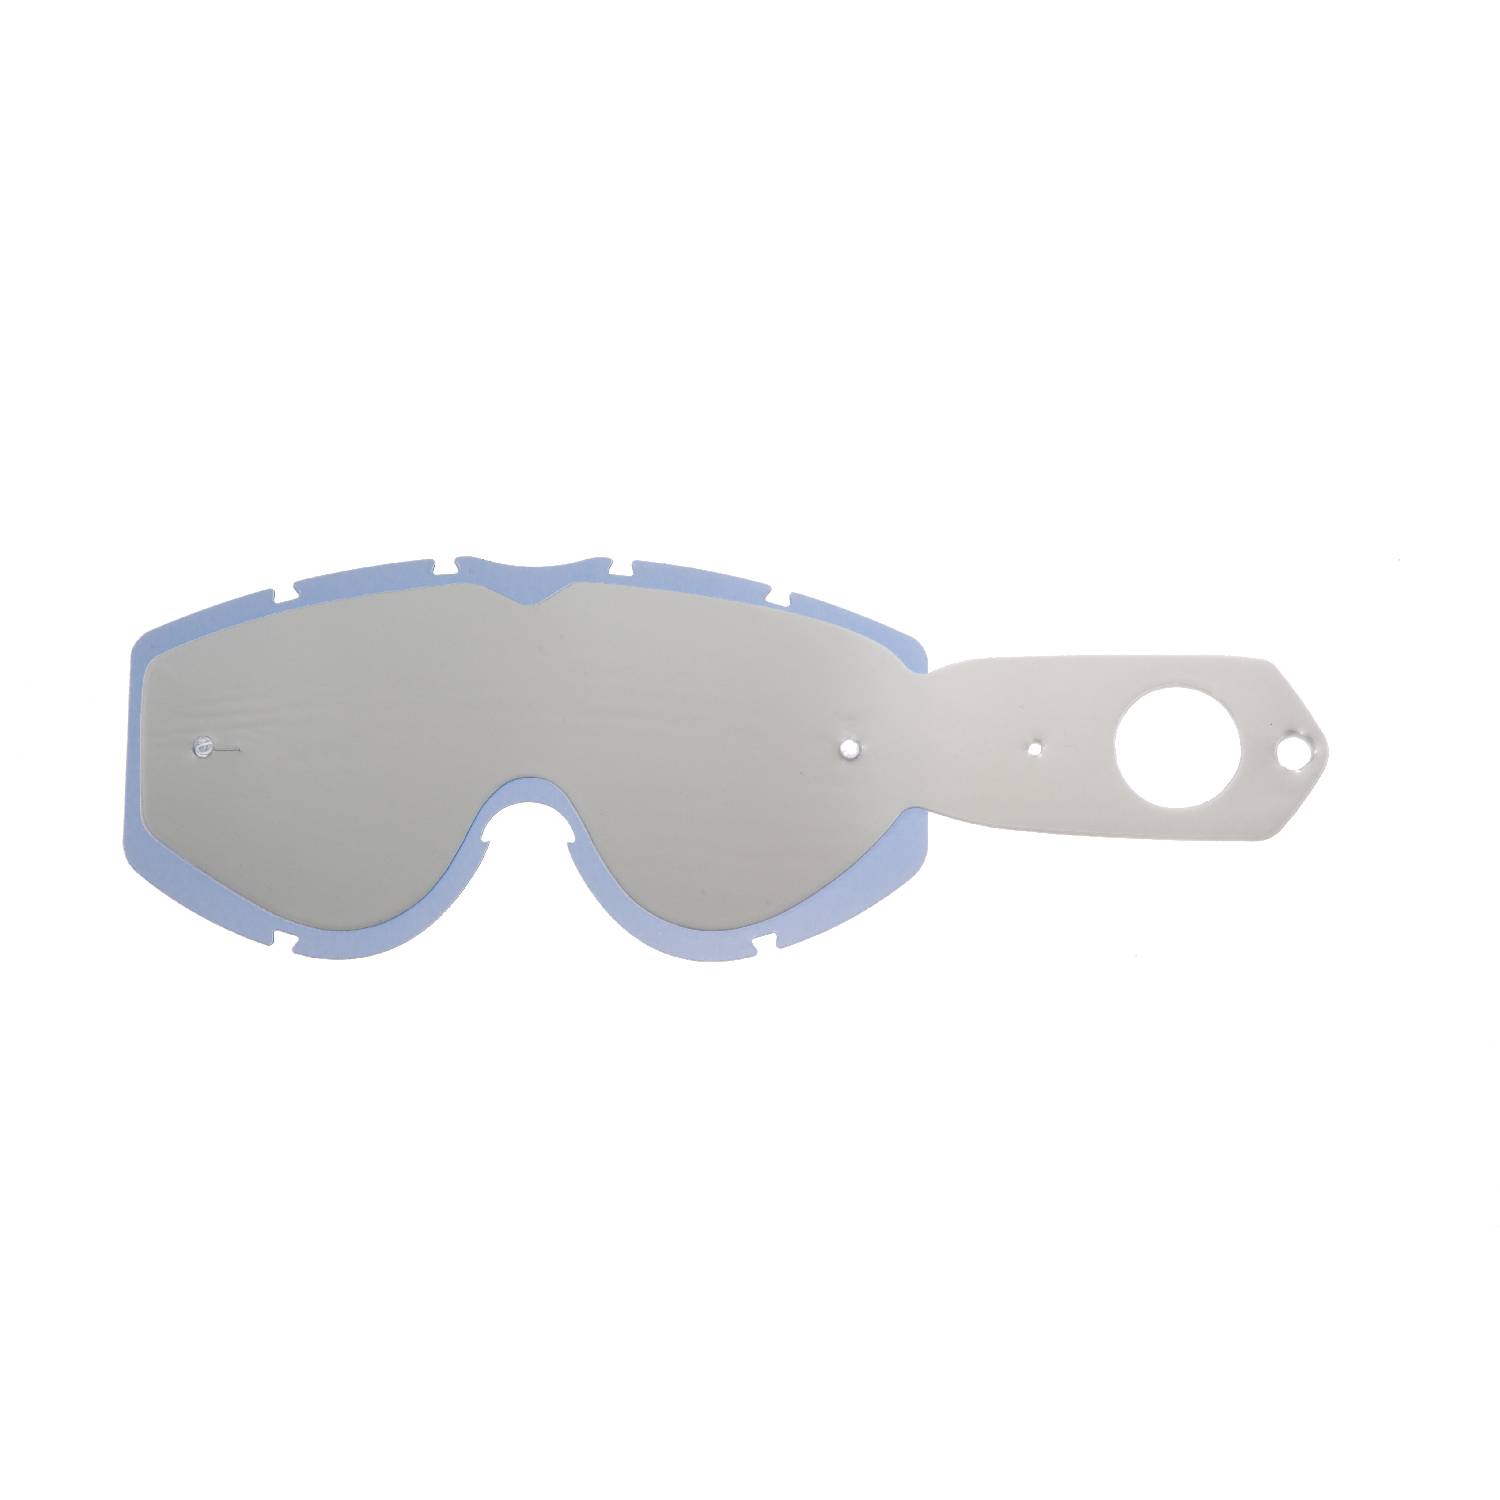 combo lenses with smokey lenses with 10 tear off compatible for Progrip 3200 / 3450  / 3400  / 3201 i / 3204 / 3301 goggle